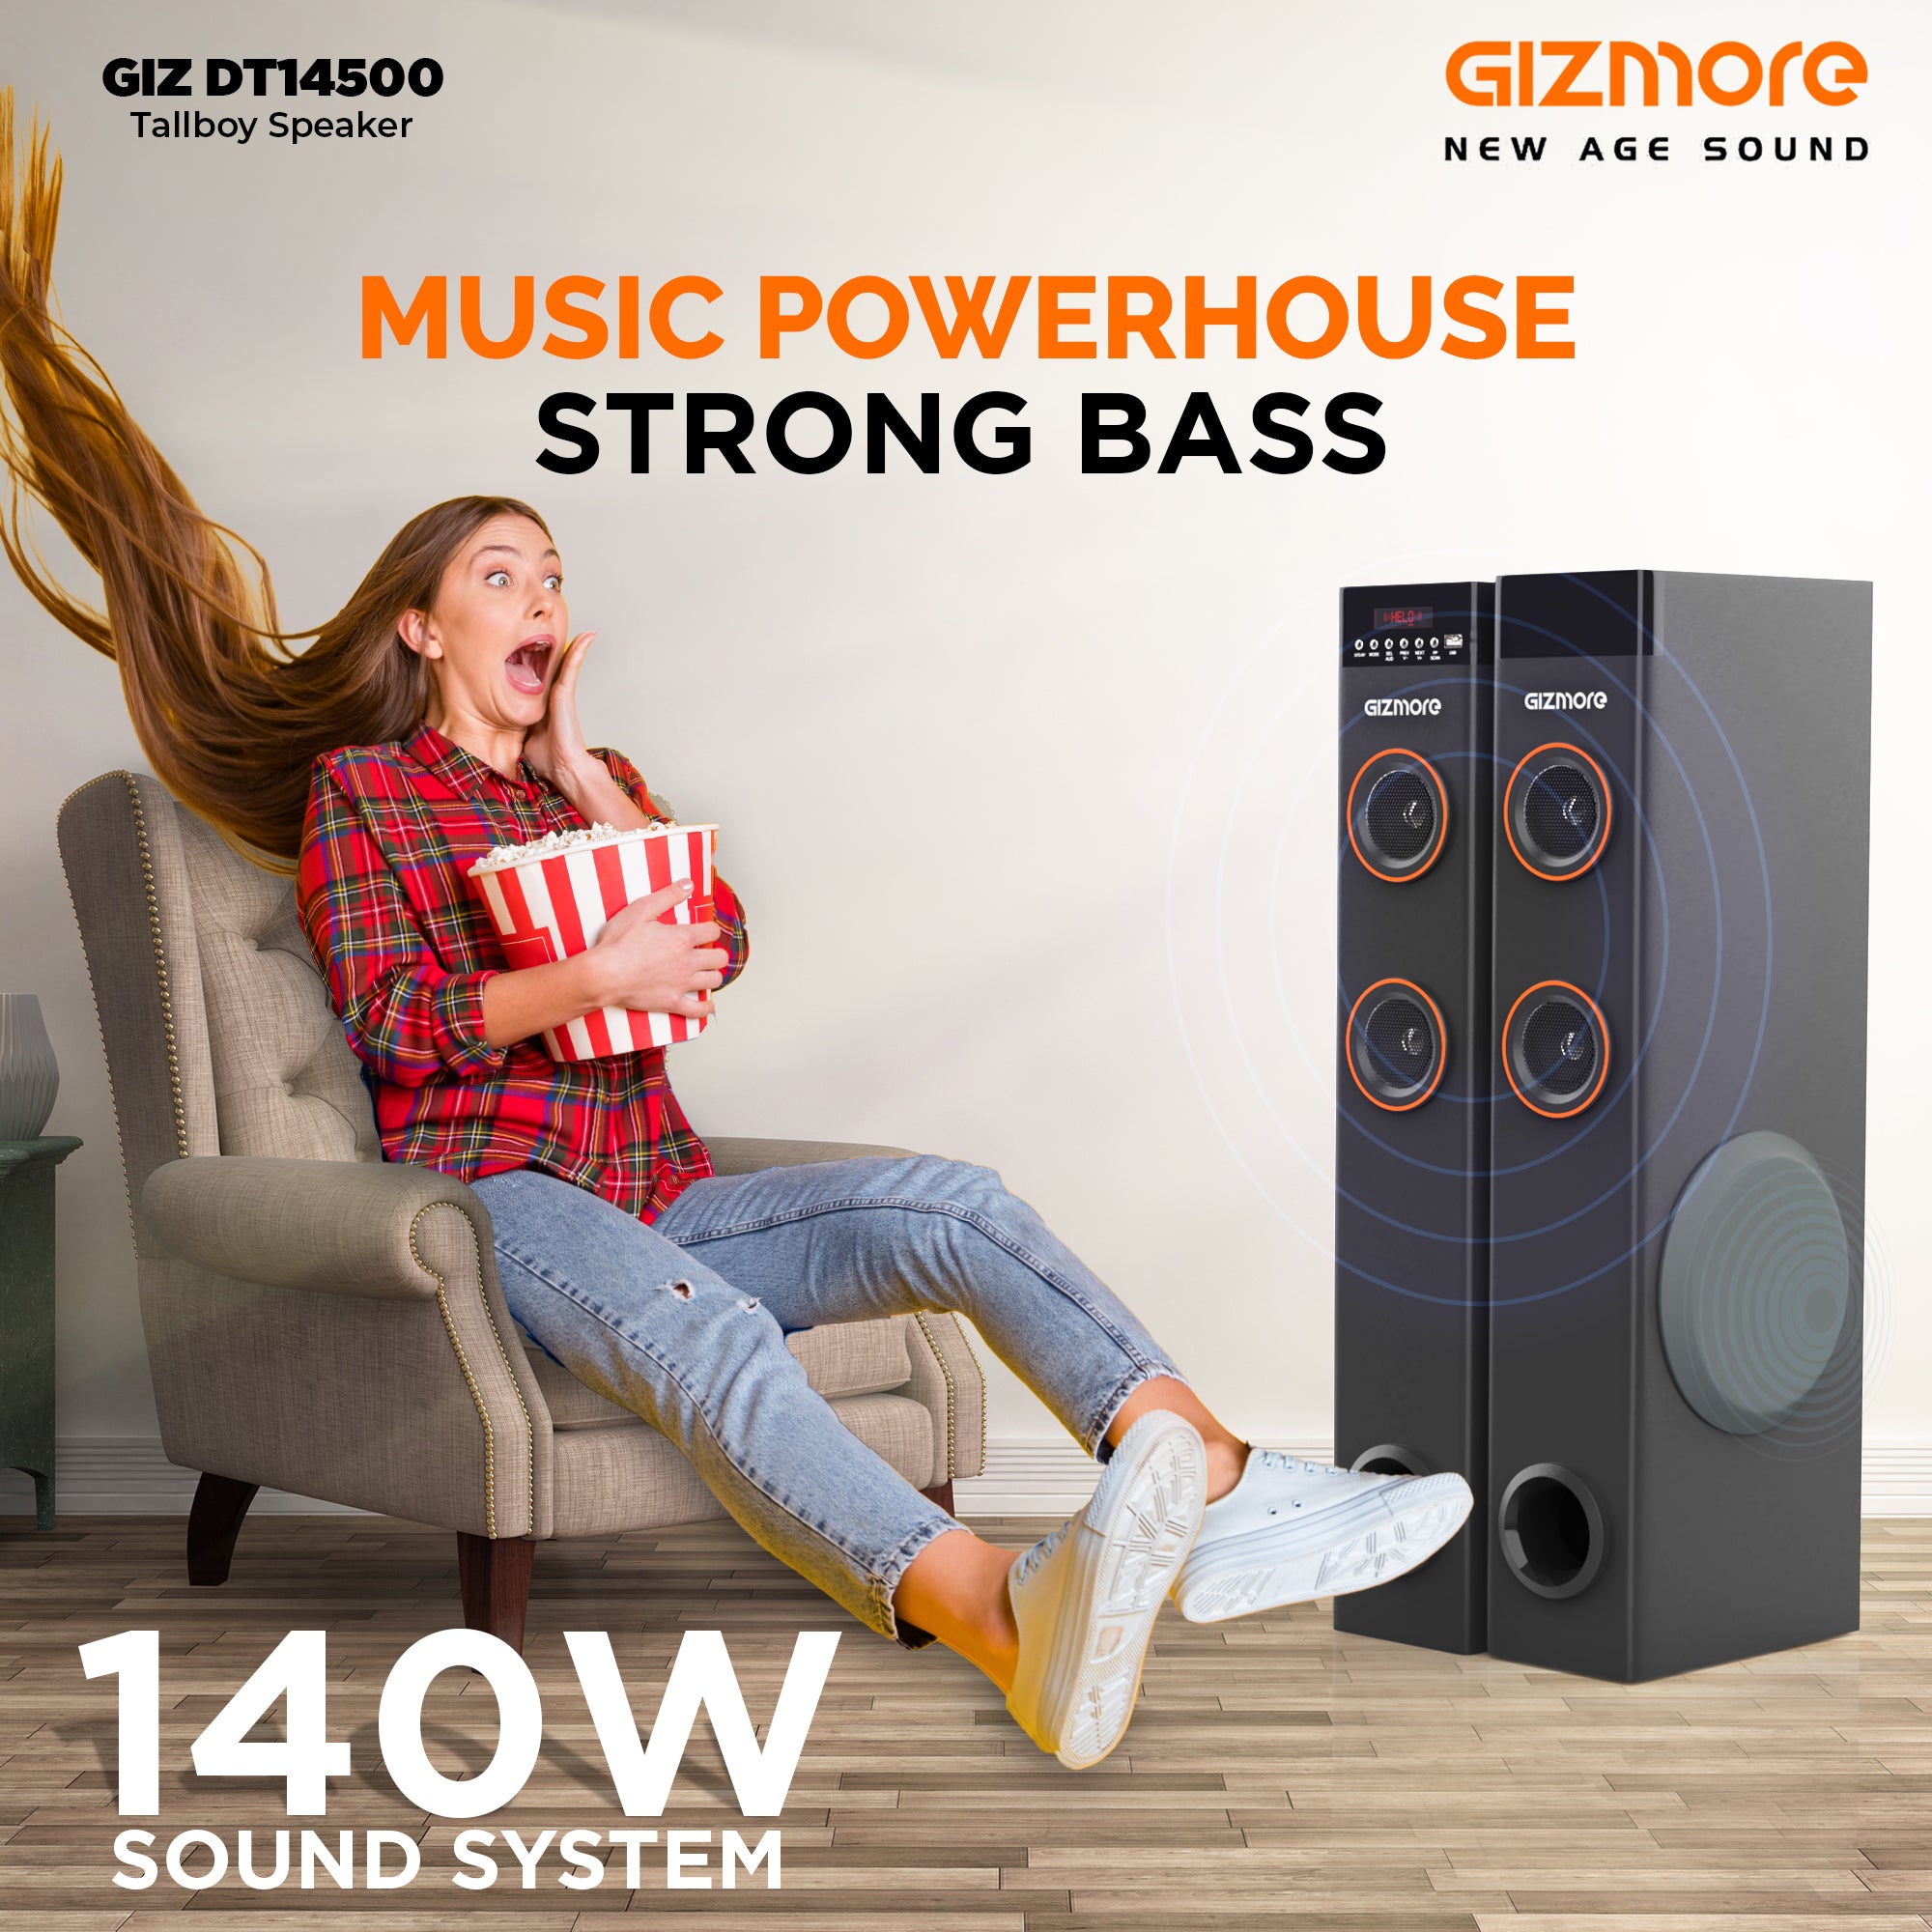 GIZMORE DT14500 Tallboy Dual Tower Speaker 140W, Twin 10 Inch Woofers & 2 Wireless Mic with Remote Control Home Theatre System with Multi Connectivity, & Inbuilt FM